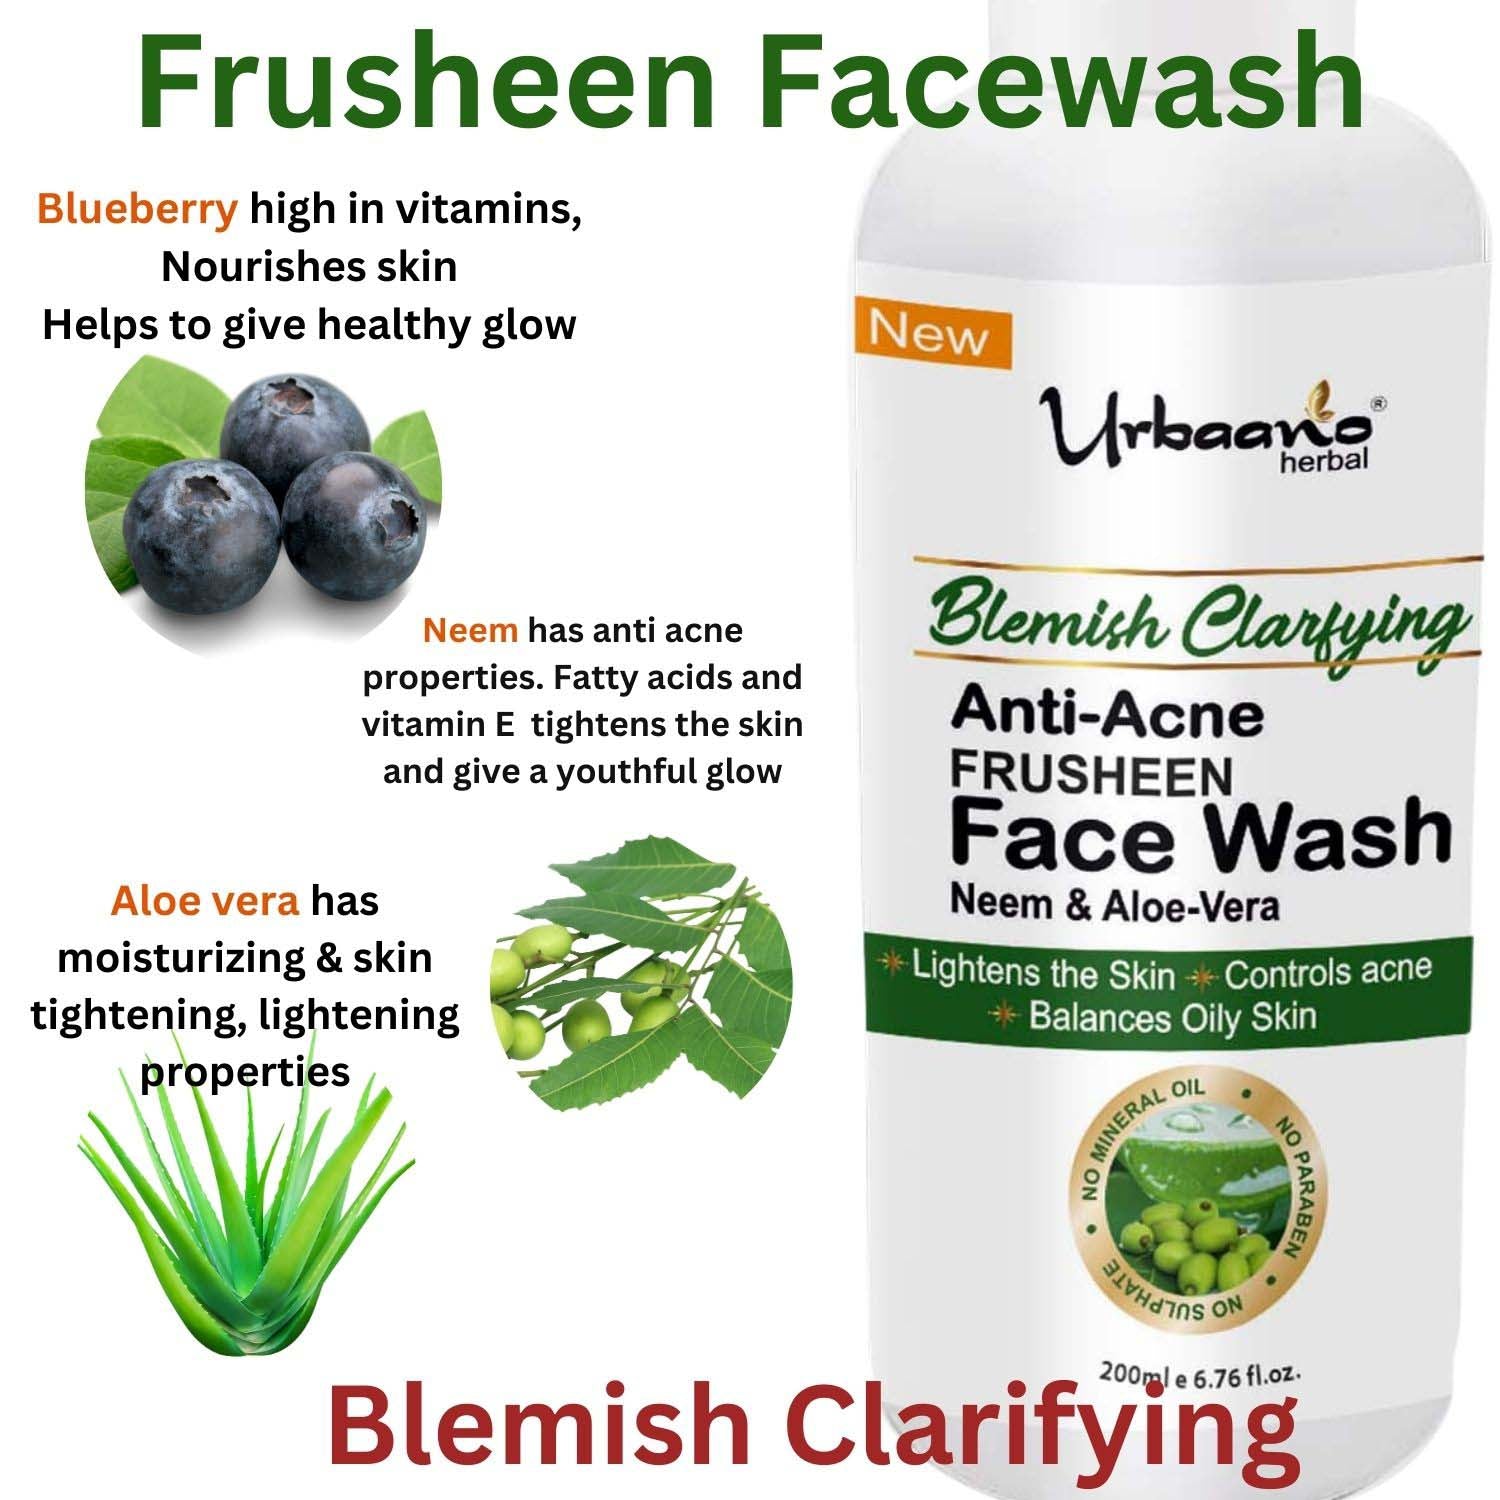 urbaano herbal frusheen sulphate free face wash anti acne infused with blueberry,aloe vera, neem for nourishing, firming, reduce dark , acne spot, tan, blemishes